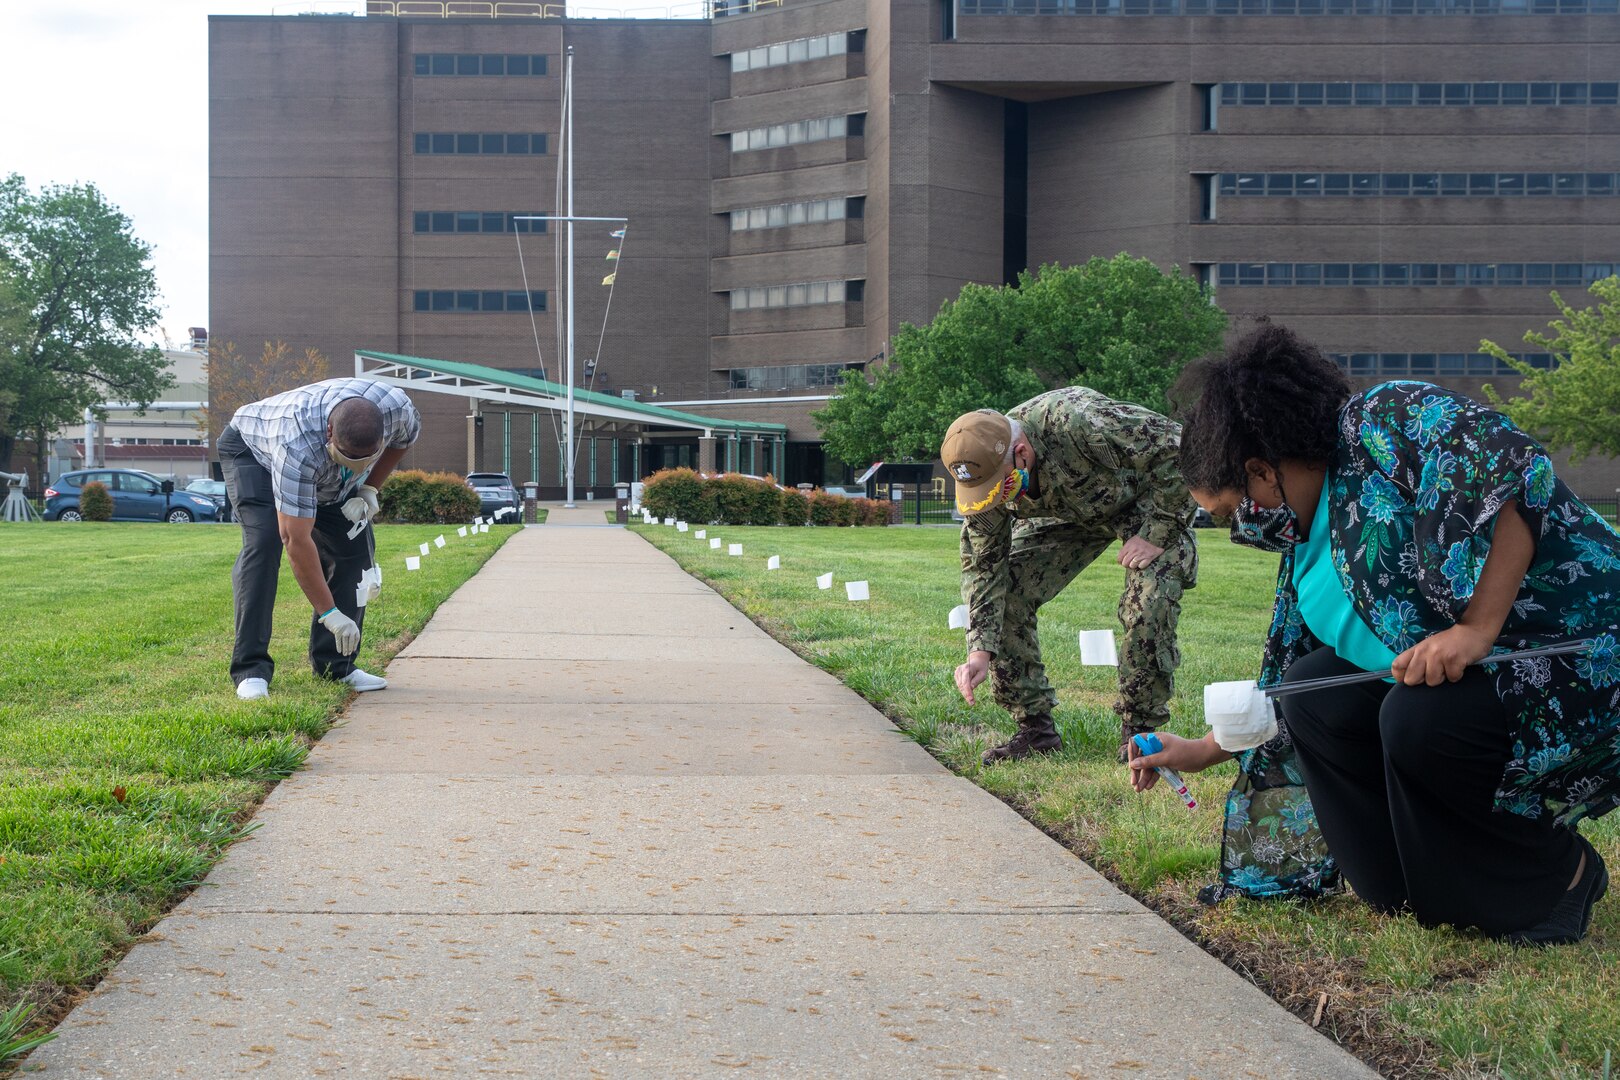 Norfolk Naval Shipyard’s (NNSY) and Suffolk Complex’s Sexual Assault Response Coordinator (SARC) Shalise Bates-Pratt and select individuals continued to observe the yearly tradition of placing small flags along the walkway in front of NNSY’s Norman Sisisky Management and Engineering Building, each flag with handwritten message to victims of sexual assault showing support.